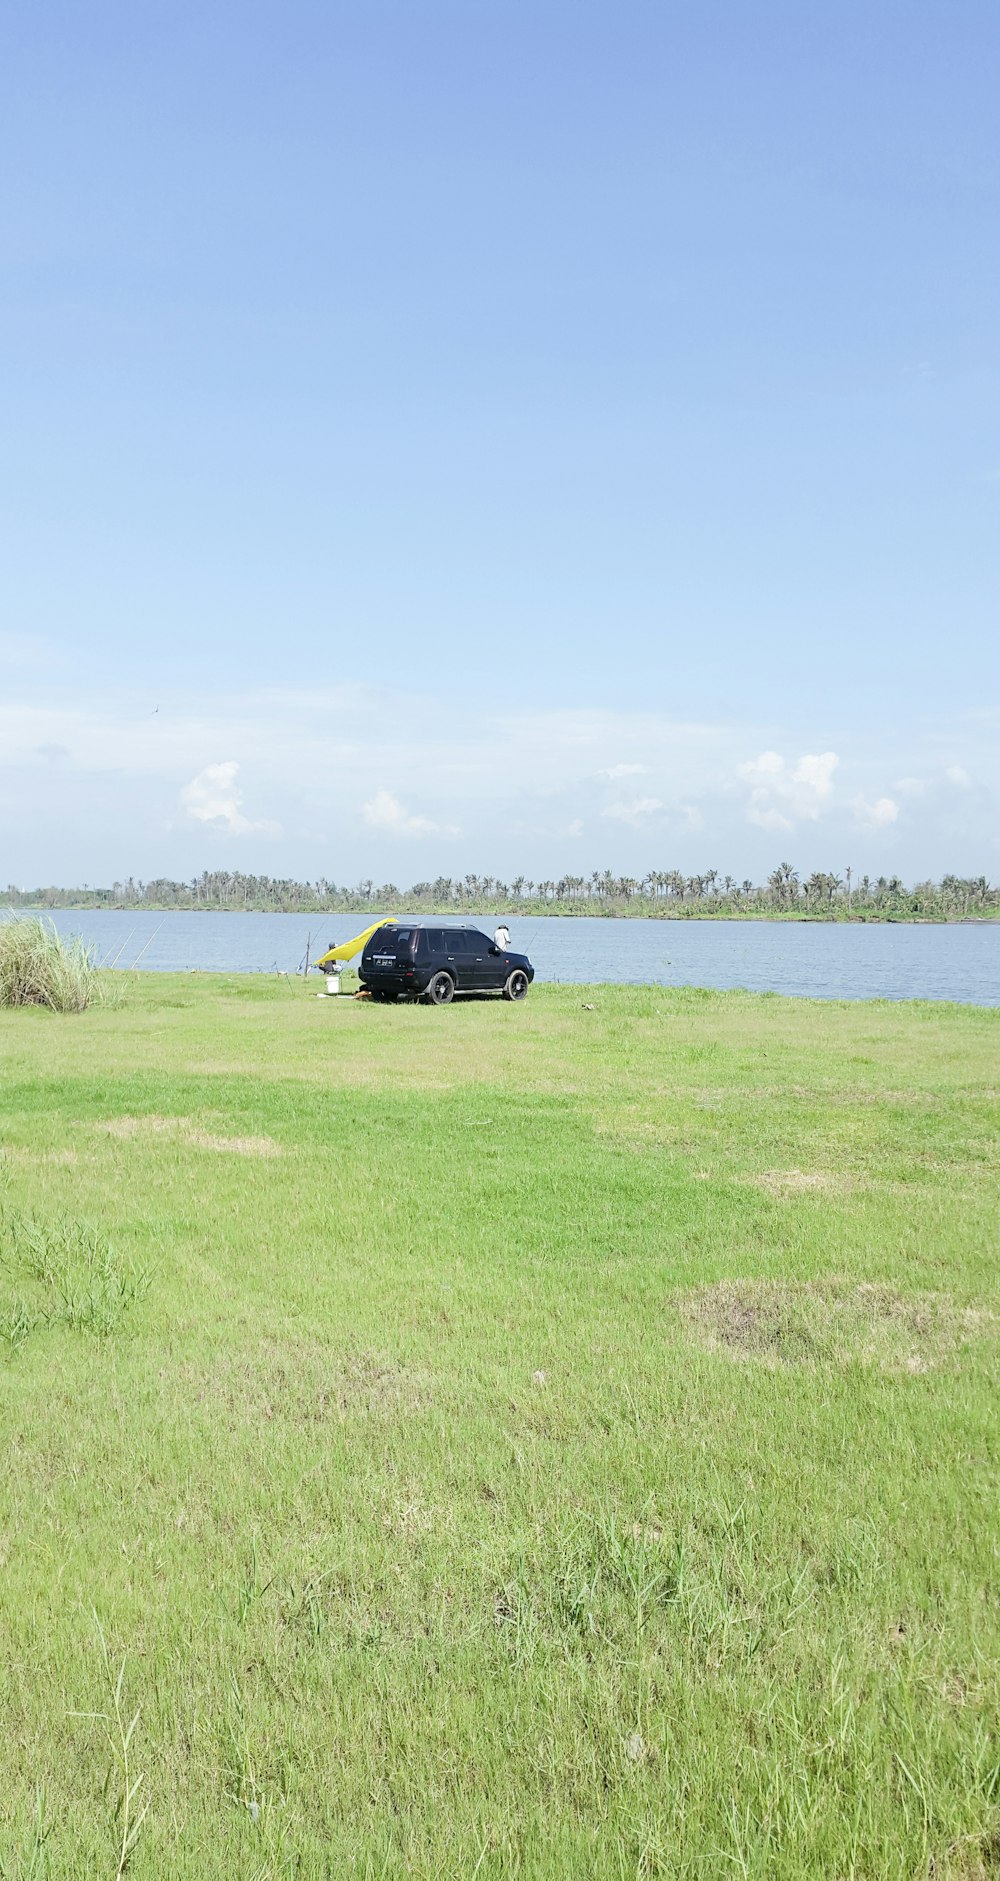 black car on green grass field near body of water during daytime